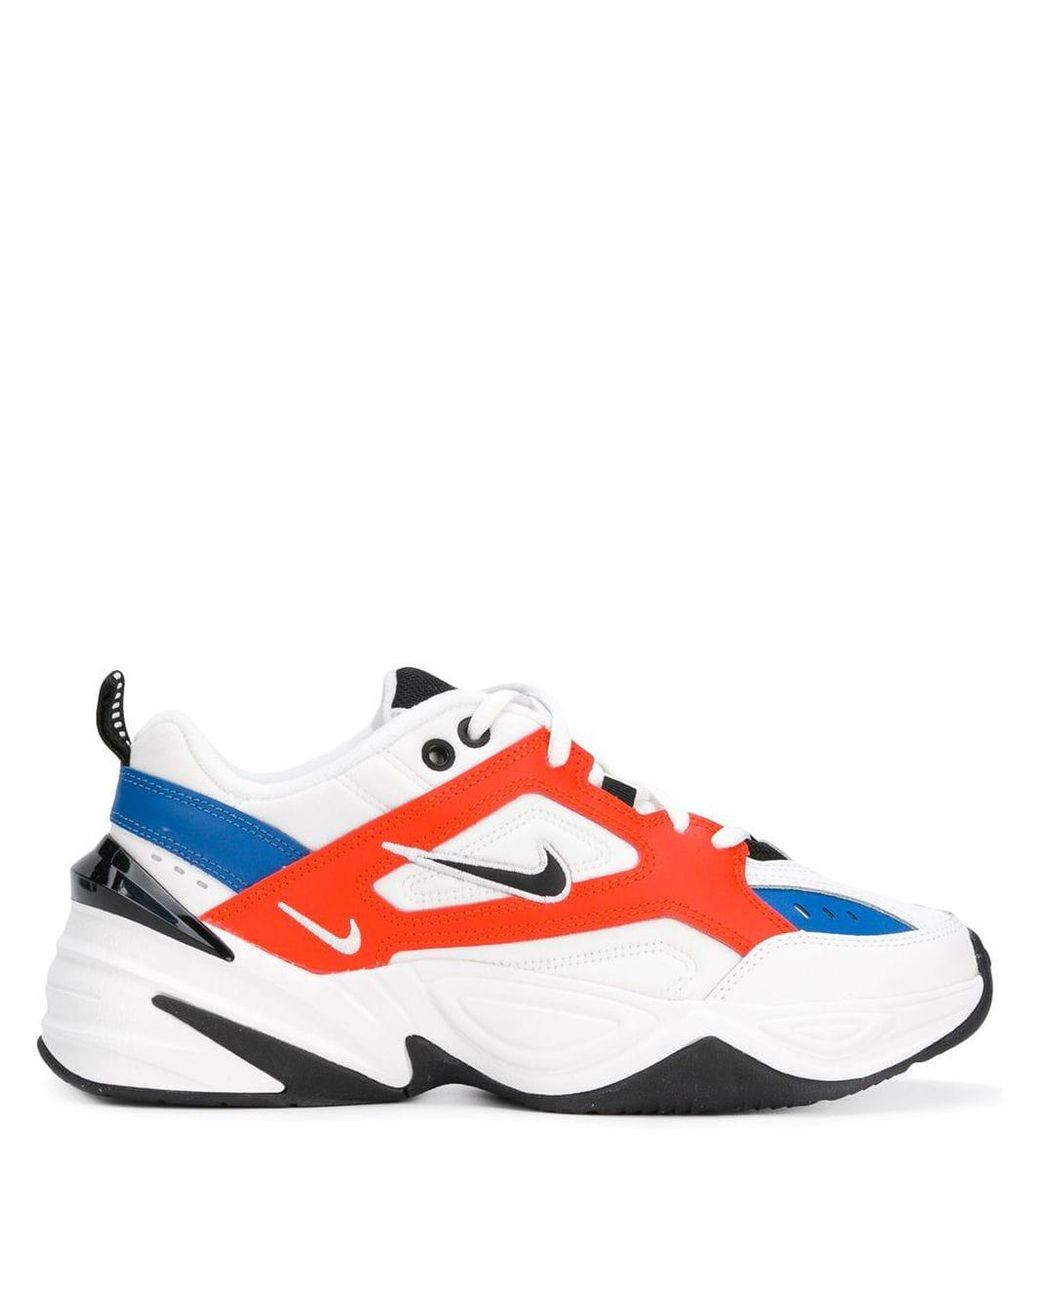 Nike M2k Tekno Leather And Neoprene Sneakers in White for Men - Save 84% |  Lyst